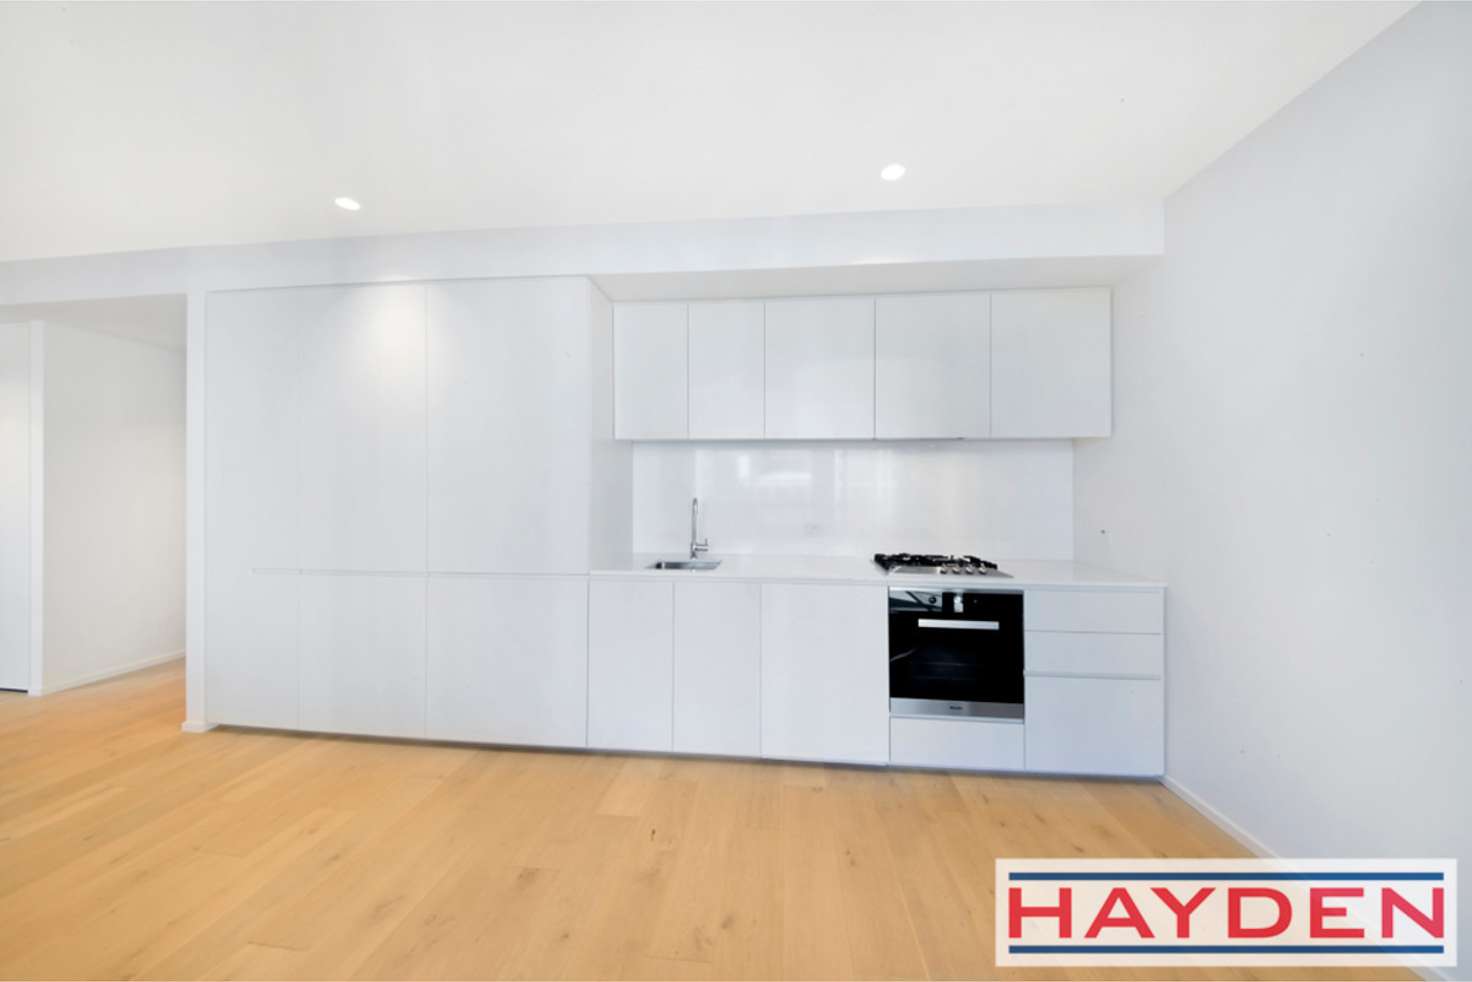 Main view of Homely apartment listing, 206/7 Evergreen Mews, Armadale VIC 3143